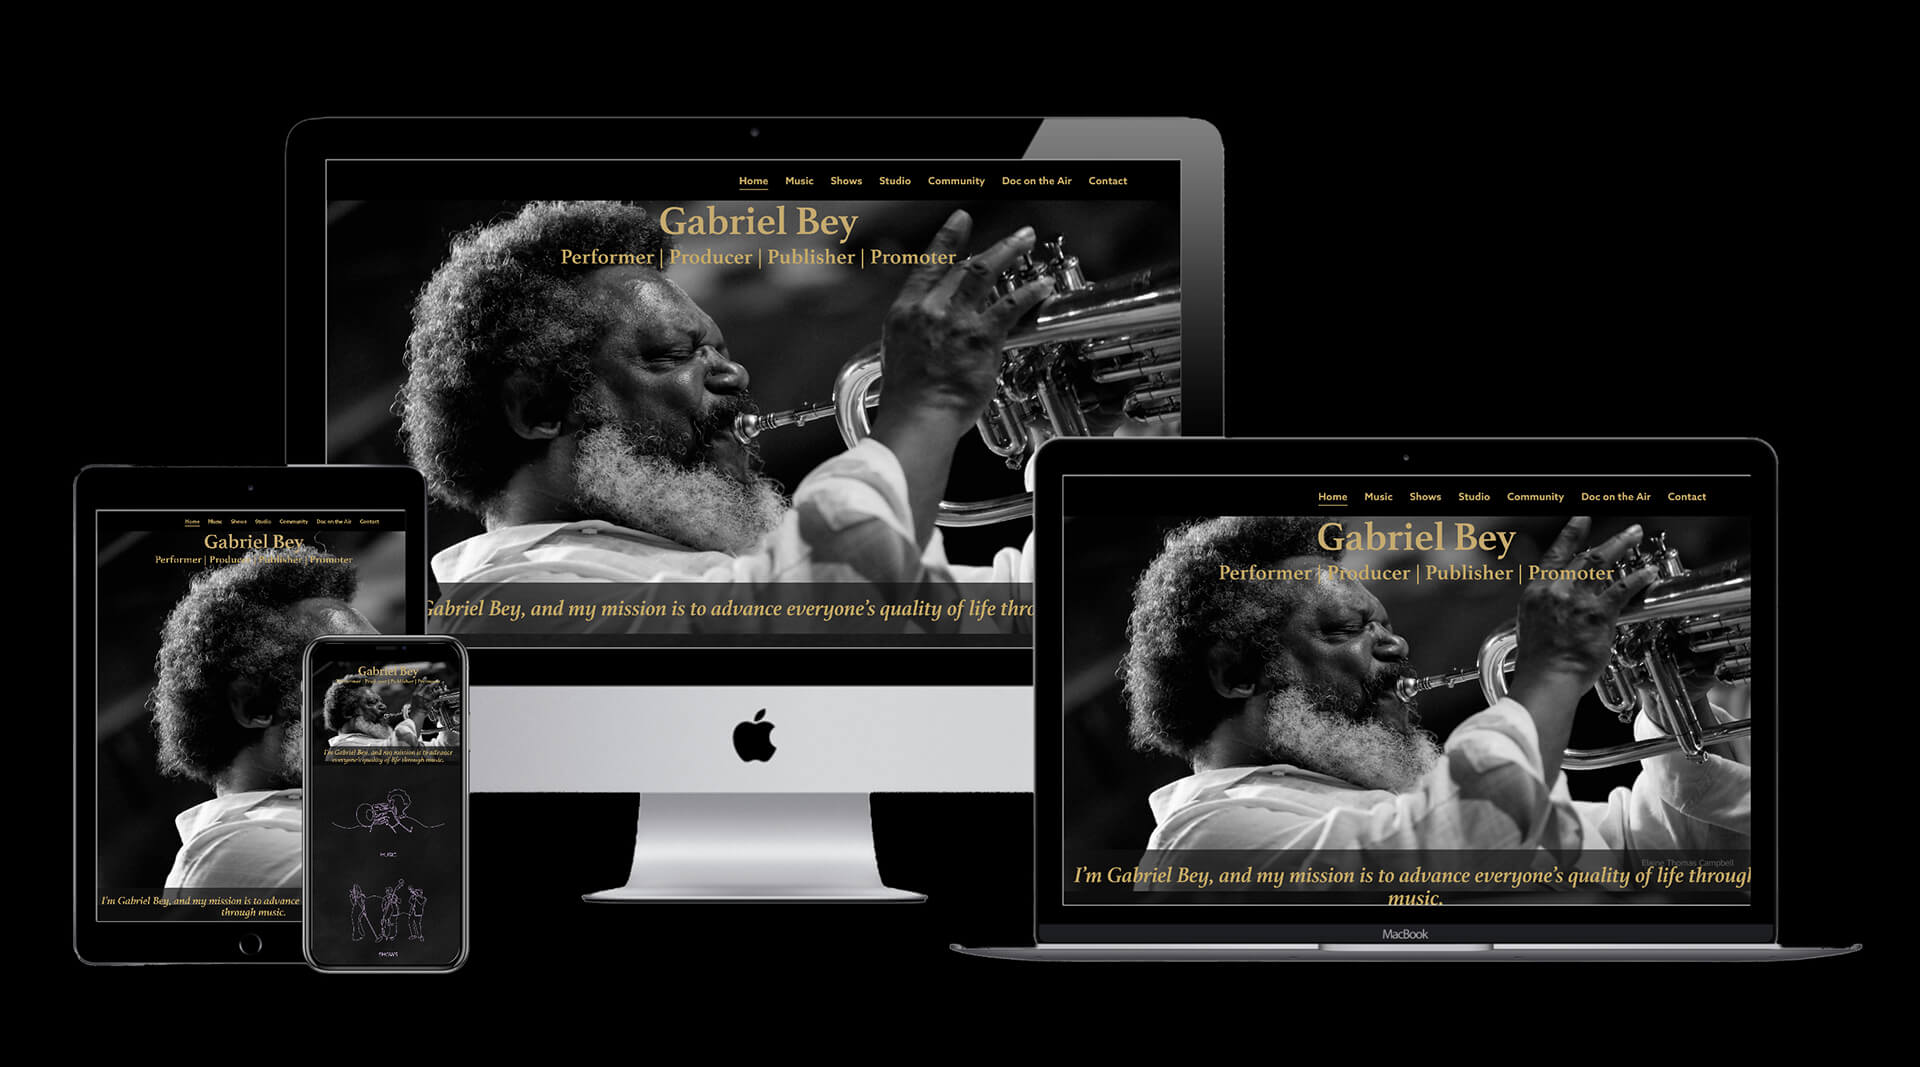 Graphic showing the website designed by Clamshell Communications for Gabriel Bey on four device screens